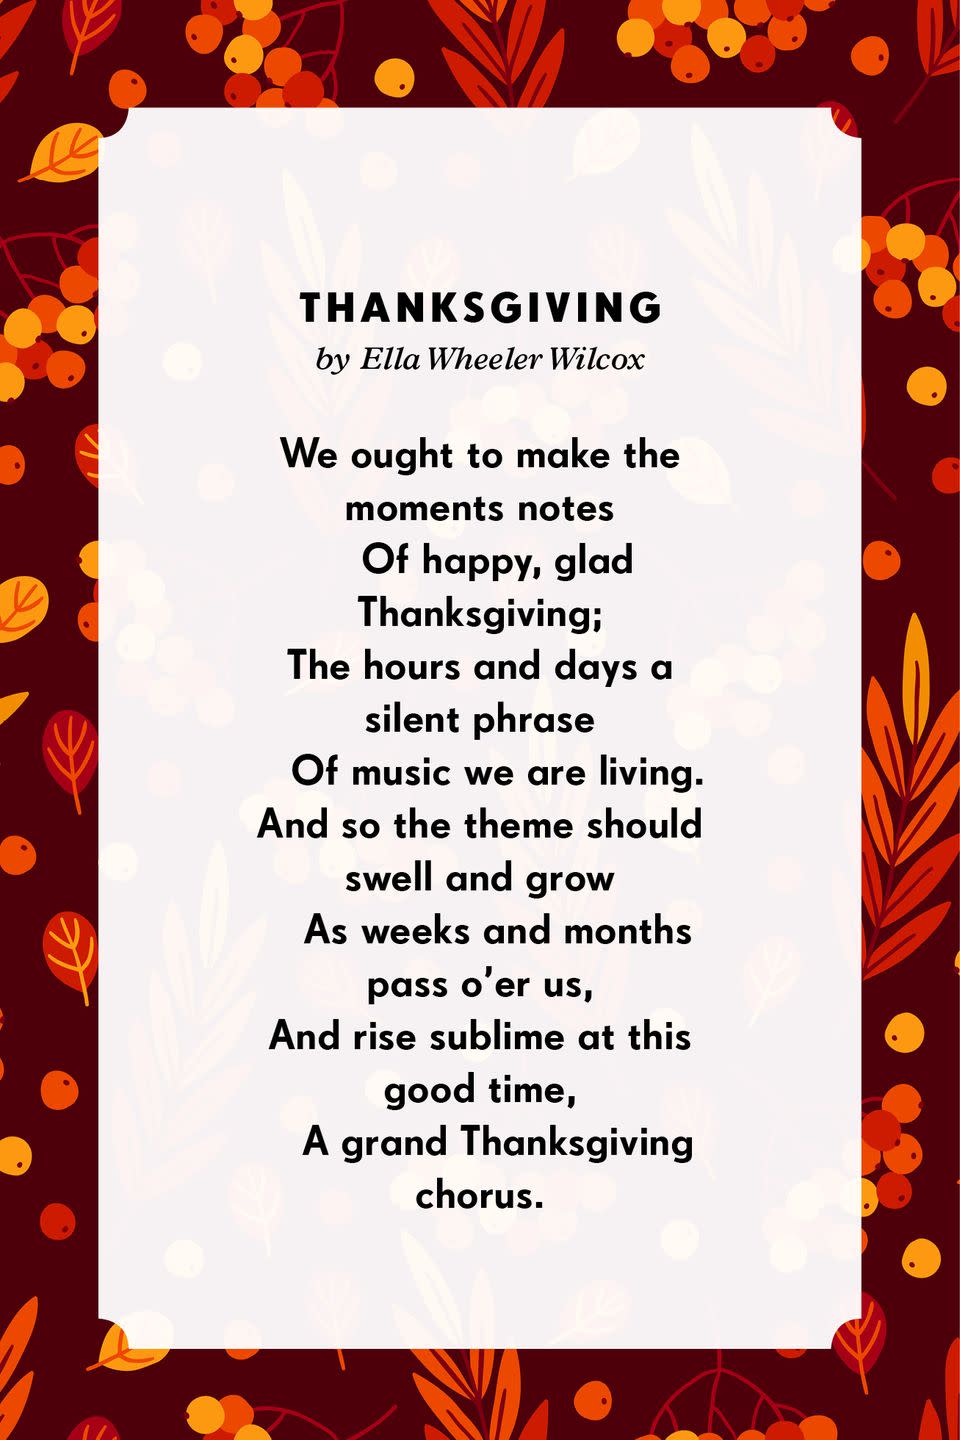 <p><strong>Thanksgiving</strong></p><p>We ought to make the moments notes<br> Of happy, glad Thanksgiving;<br>The hours and days a silent phrase<br> Of music we are living.<br>And so the theme should swell and grow<br> As weeks and months pass o’er us,<br>And rise sublime at this good time,<br> A grand Thanksgiving chorus.</p>